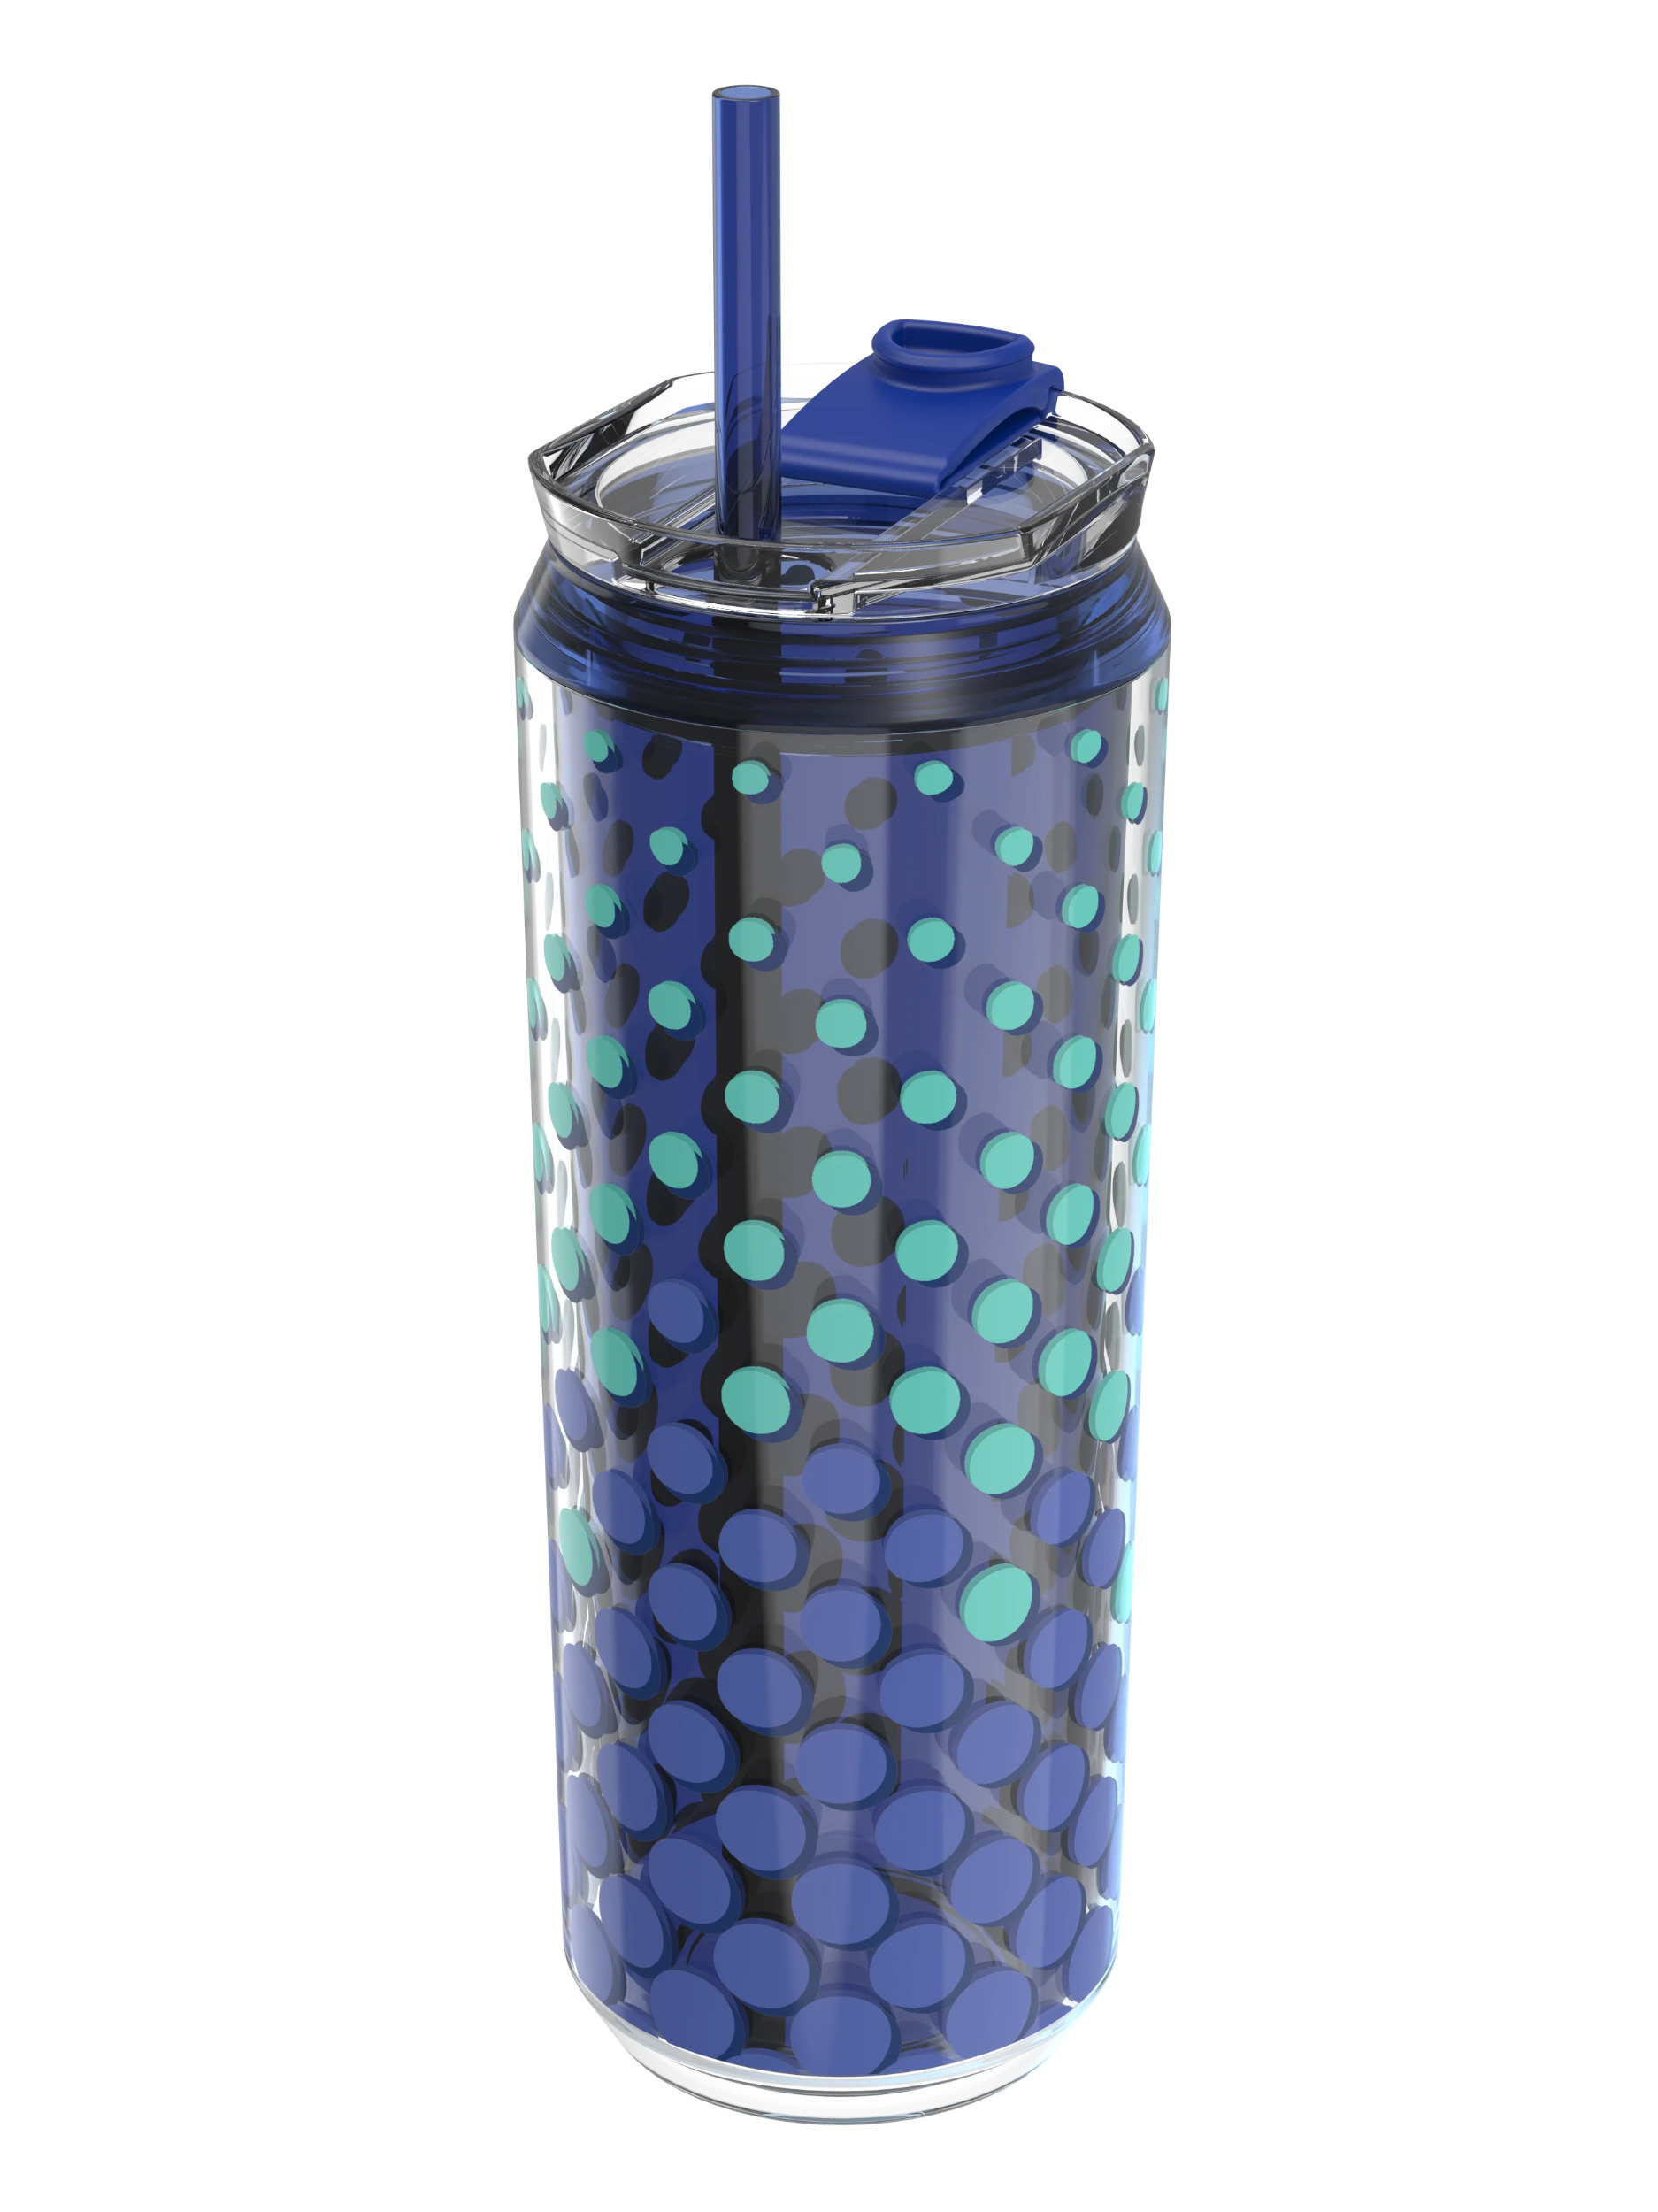 Cool Gear 3-Pack Modern Tumbler with Reusable Straw | Dishwasher Safe, Cup Holder Friendly, Spillproof, Double-Wall Insulated Travel Tumbler | Printed Dots Pack - image 2 of 2